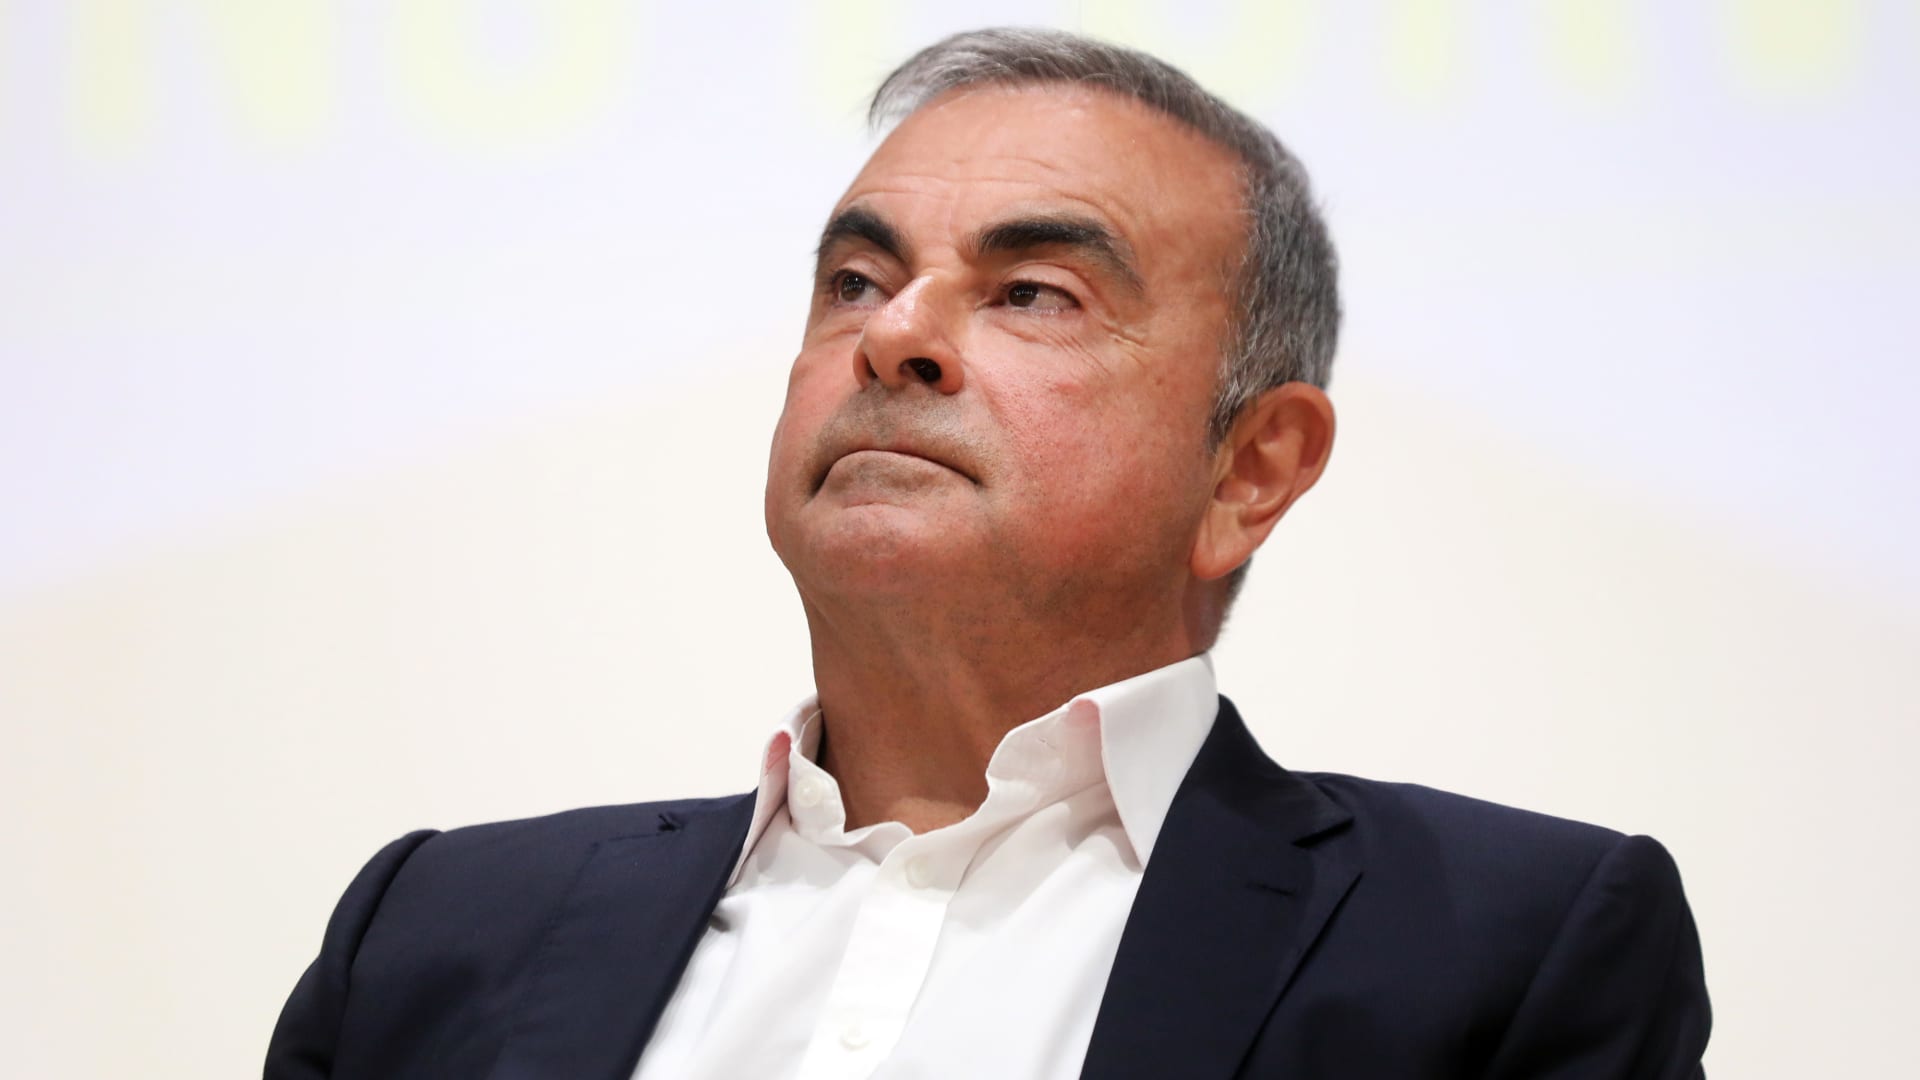 Carlos Ghosn says he expects honest trial in France following arrest warrant